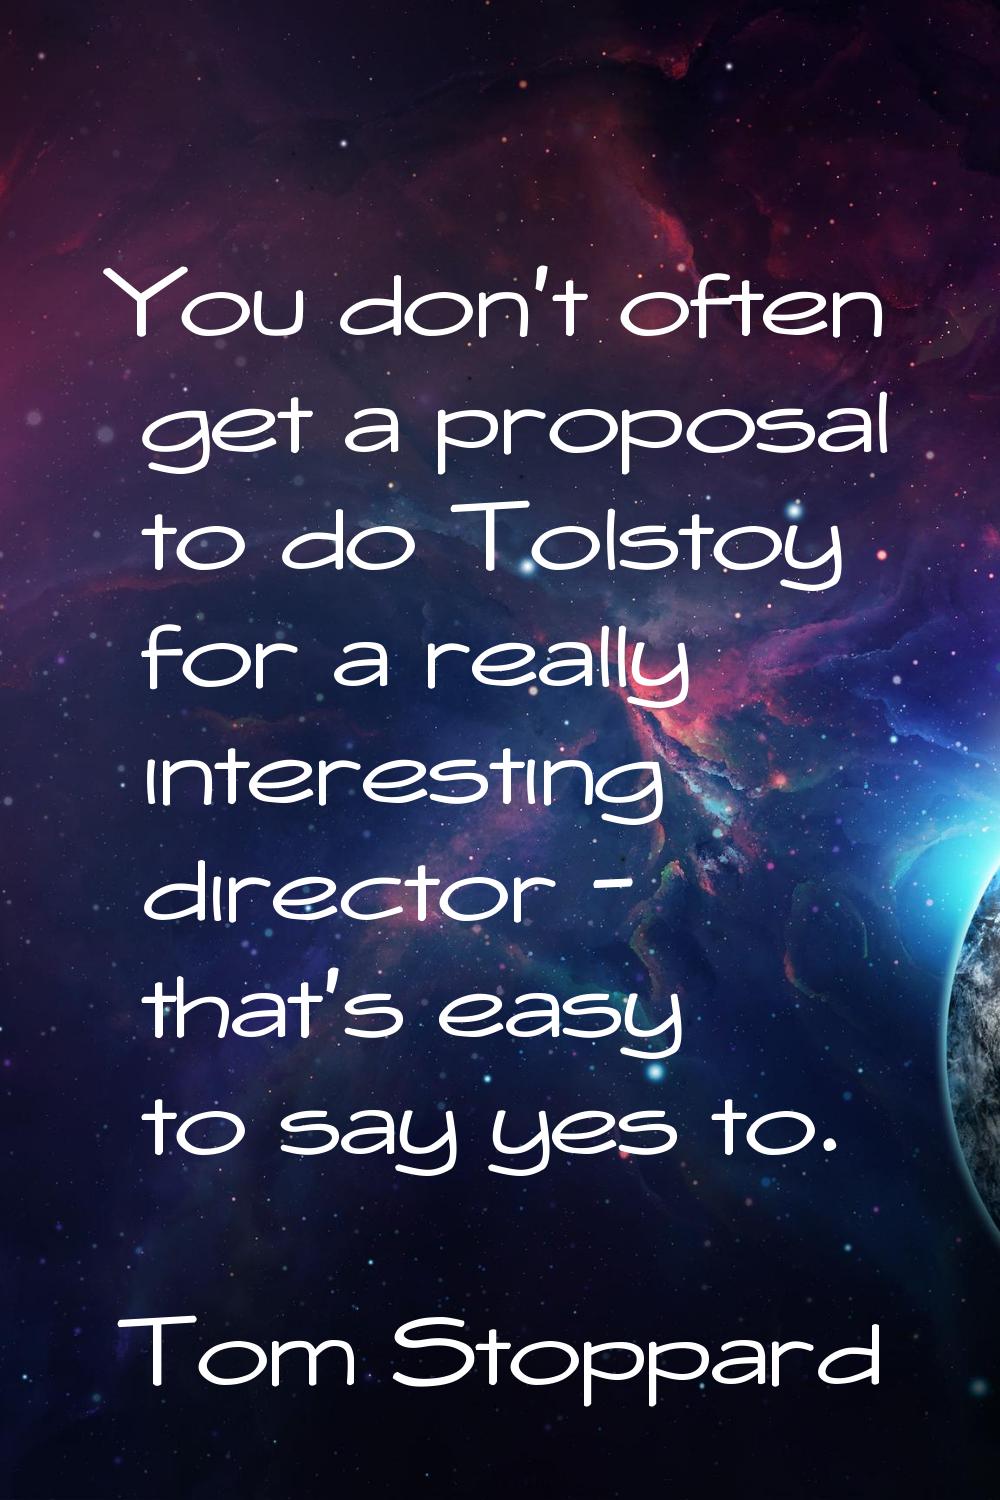 You don't often get a proposal to do Tolstoy for a really interesting director - that's easy to say